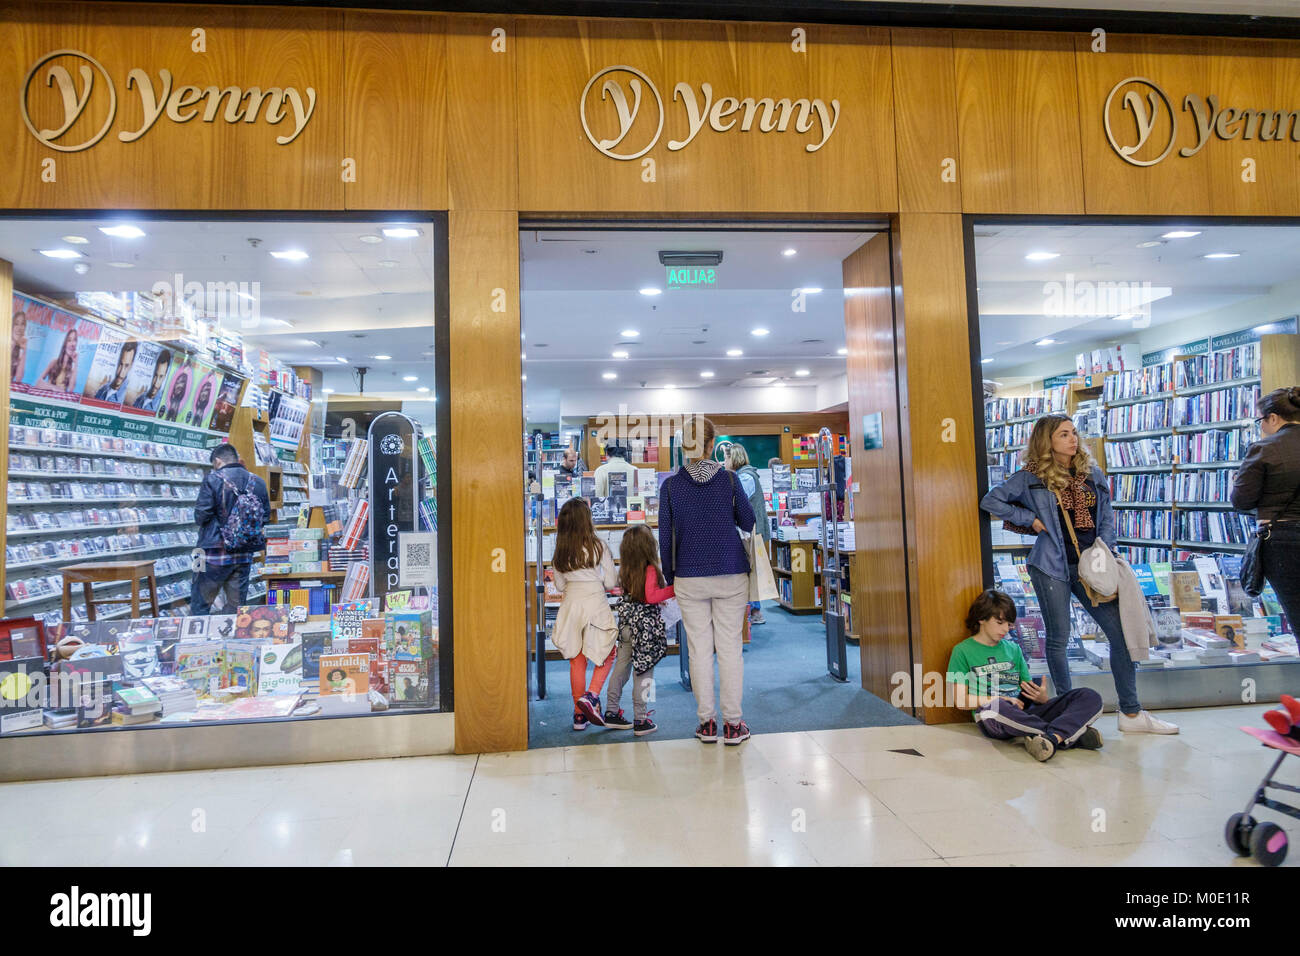 Buenos Aires Argentina,Abasto Shopping Mall,Yenny,bookstore,entrance,woman female women,girl girls,kid kids child children youngster,boy boys,male you Stock Photo